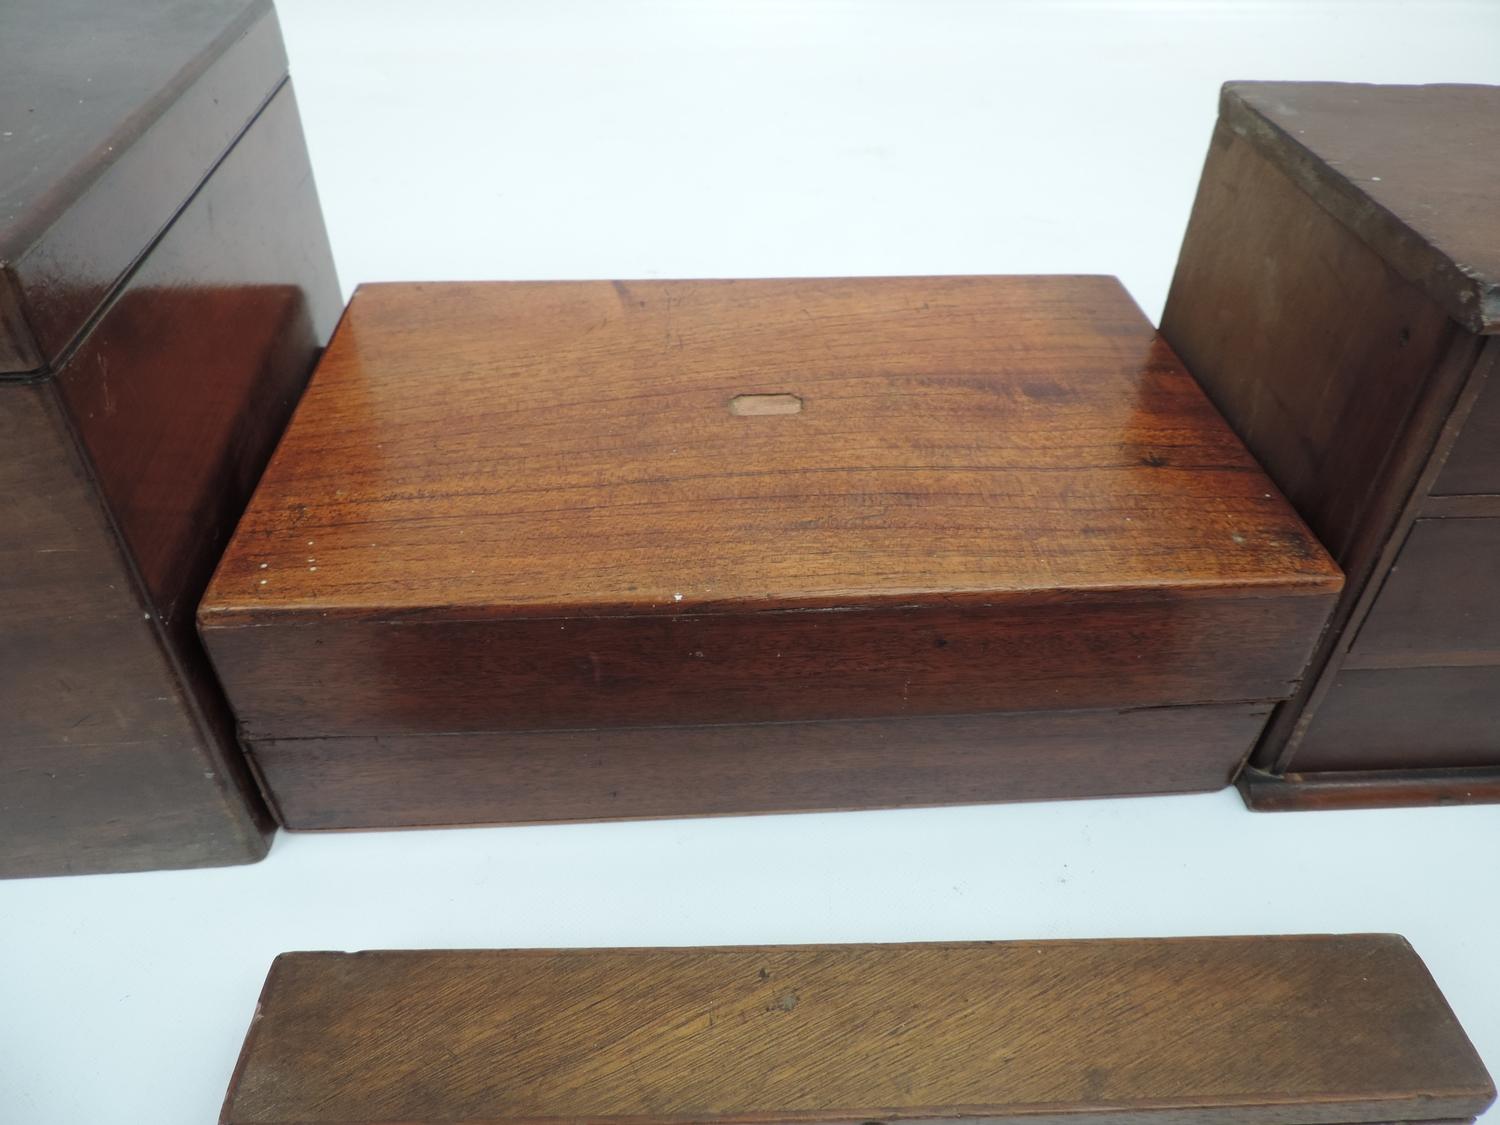 3x Wooden Boxes and a Small Three Drawer Chest - Image 3 of 5